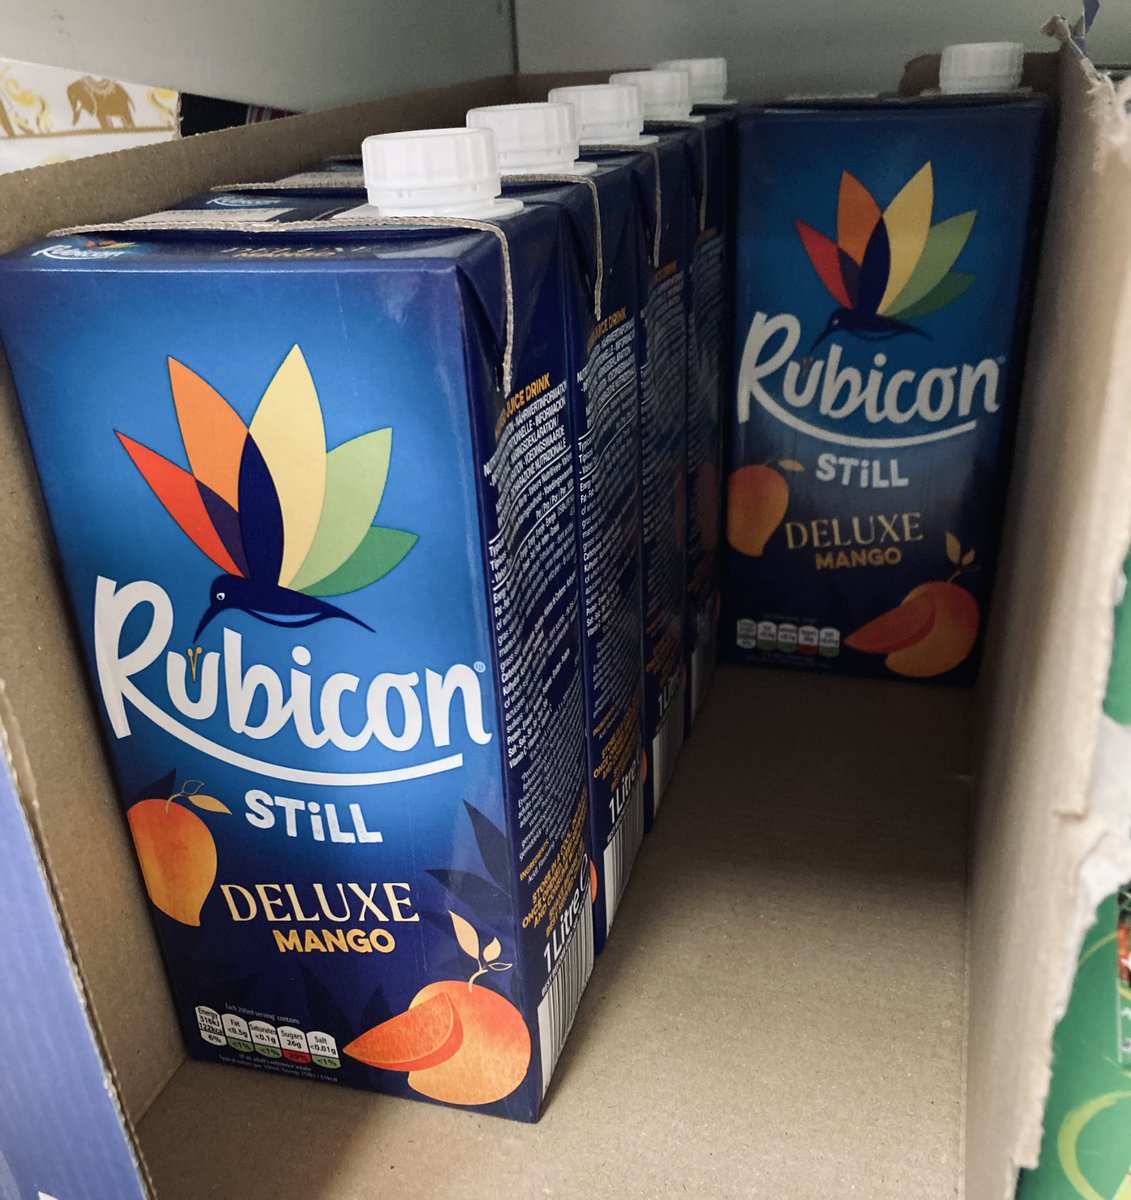 The much loved  @RubiconDrinksUK Rubicon Mango drink was nerfed into a disgusting flavour due to the Sugar Tax. Now though, they’ve repackaged the pre-Sugar Tax Rubicon Mango and sold it at a higher price as a “Deluxe” edition. It’s just the standard Rubicon Mango pre-2018. Fml.